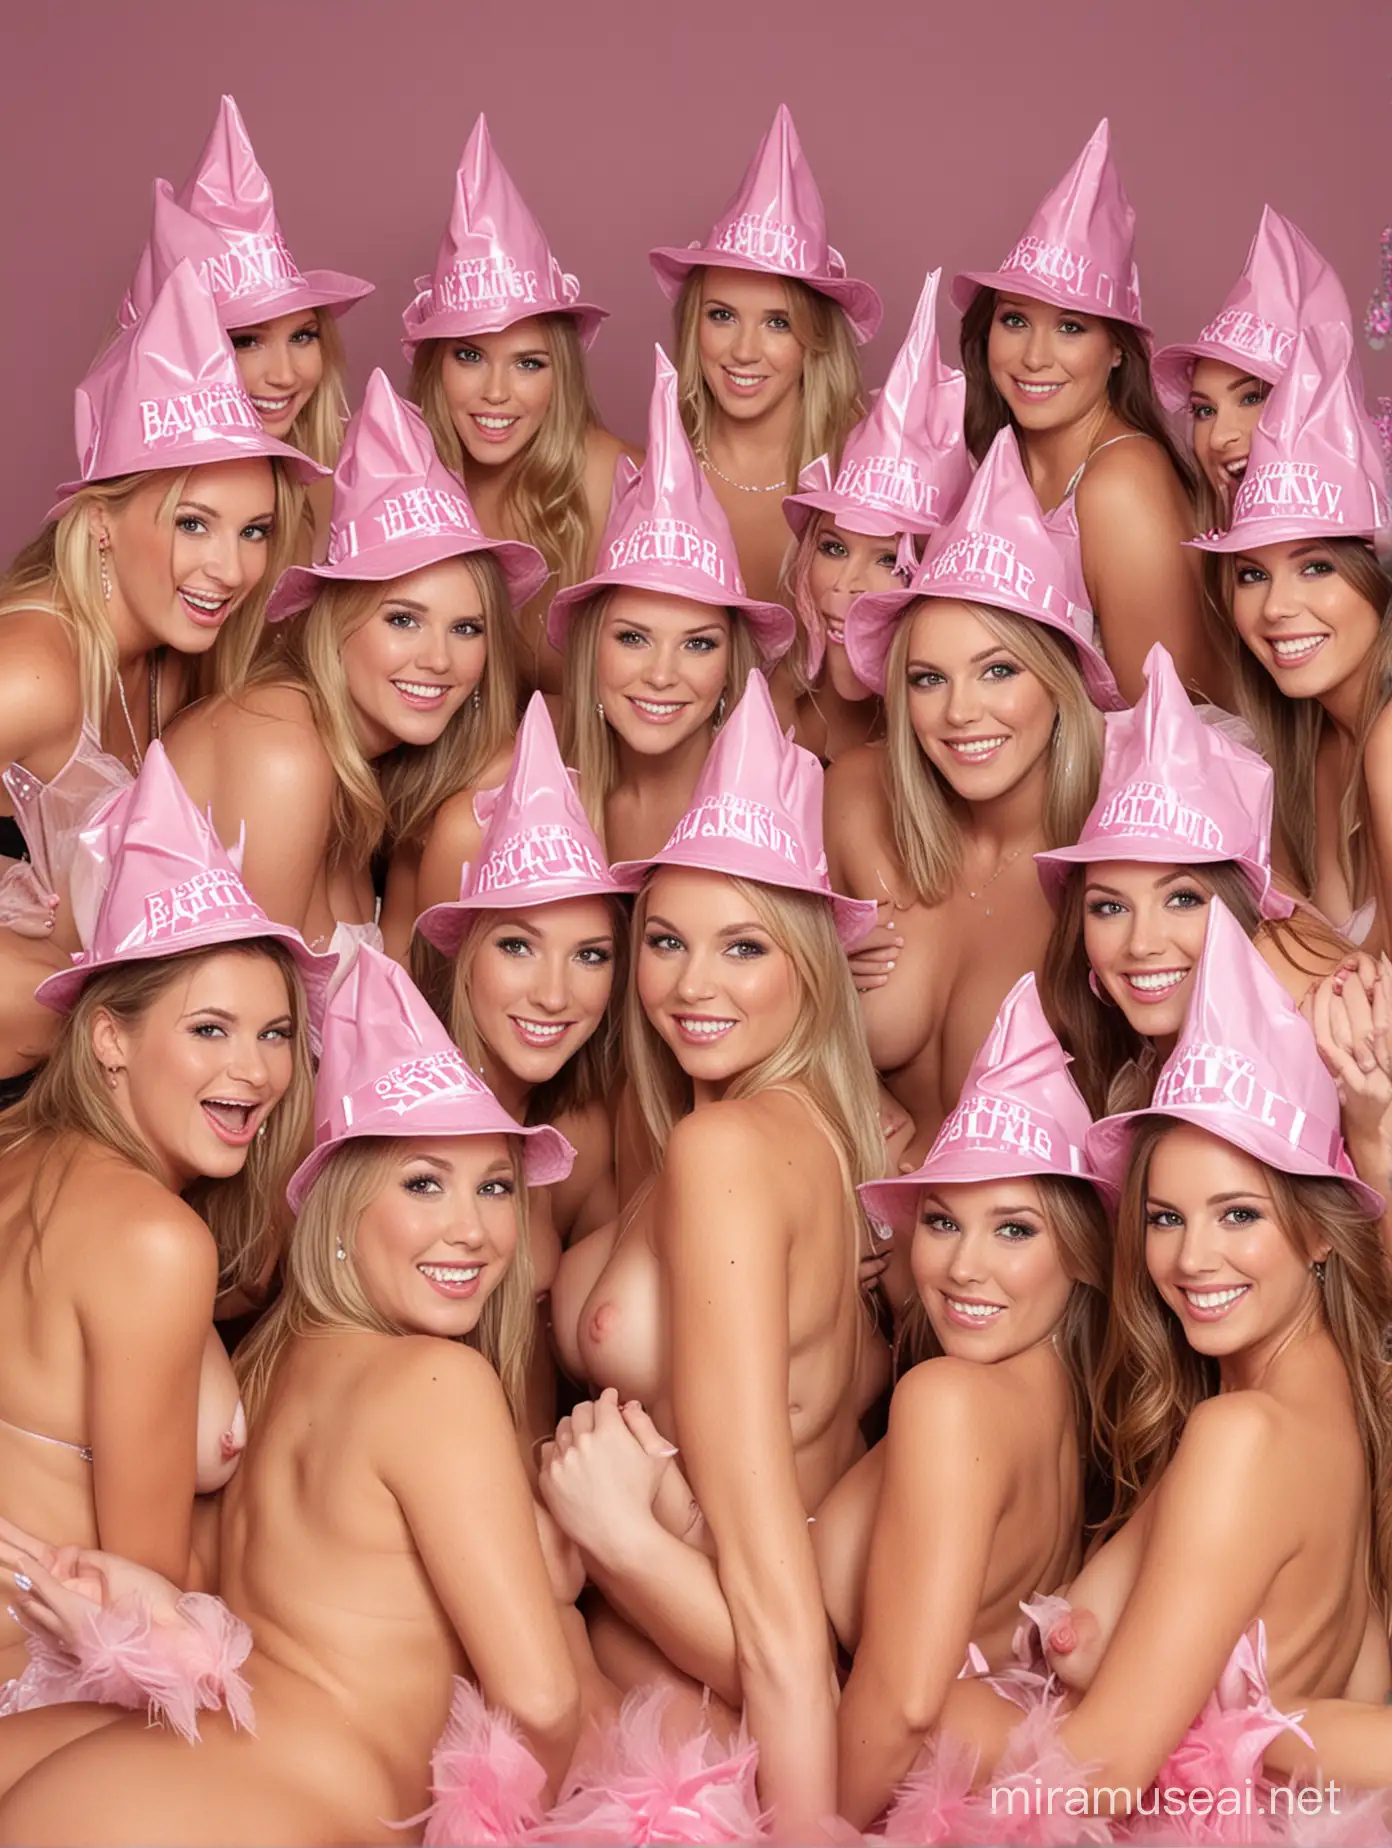 Vibrant Bachelorette Party Celebrating in Club with Pink Hats